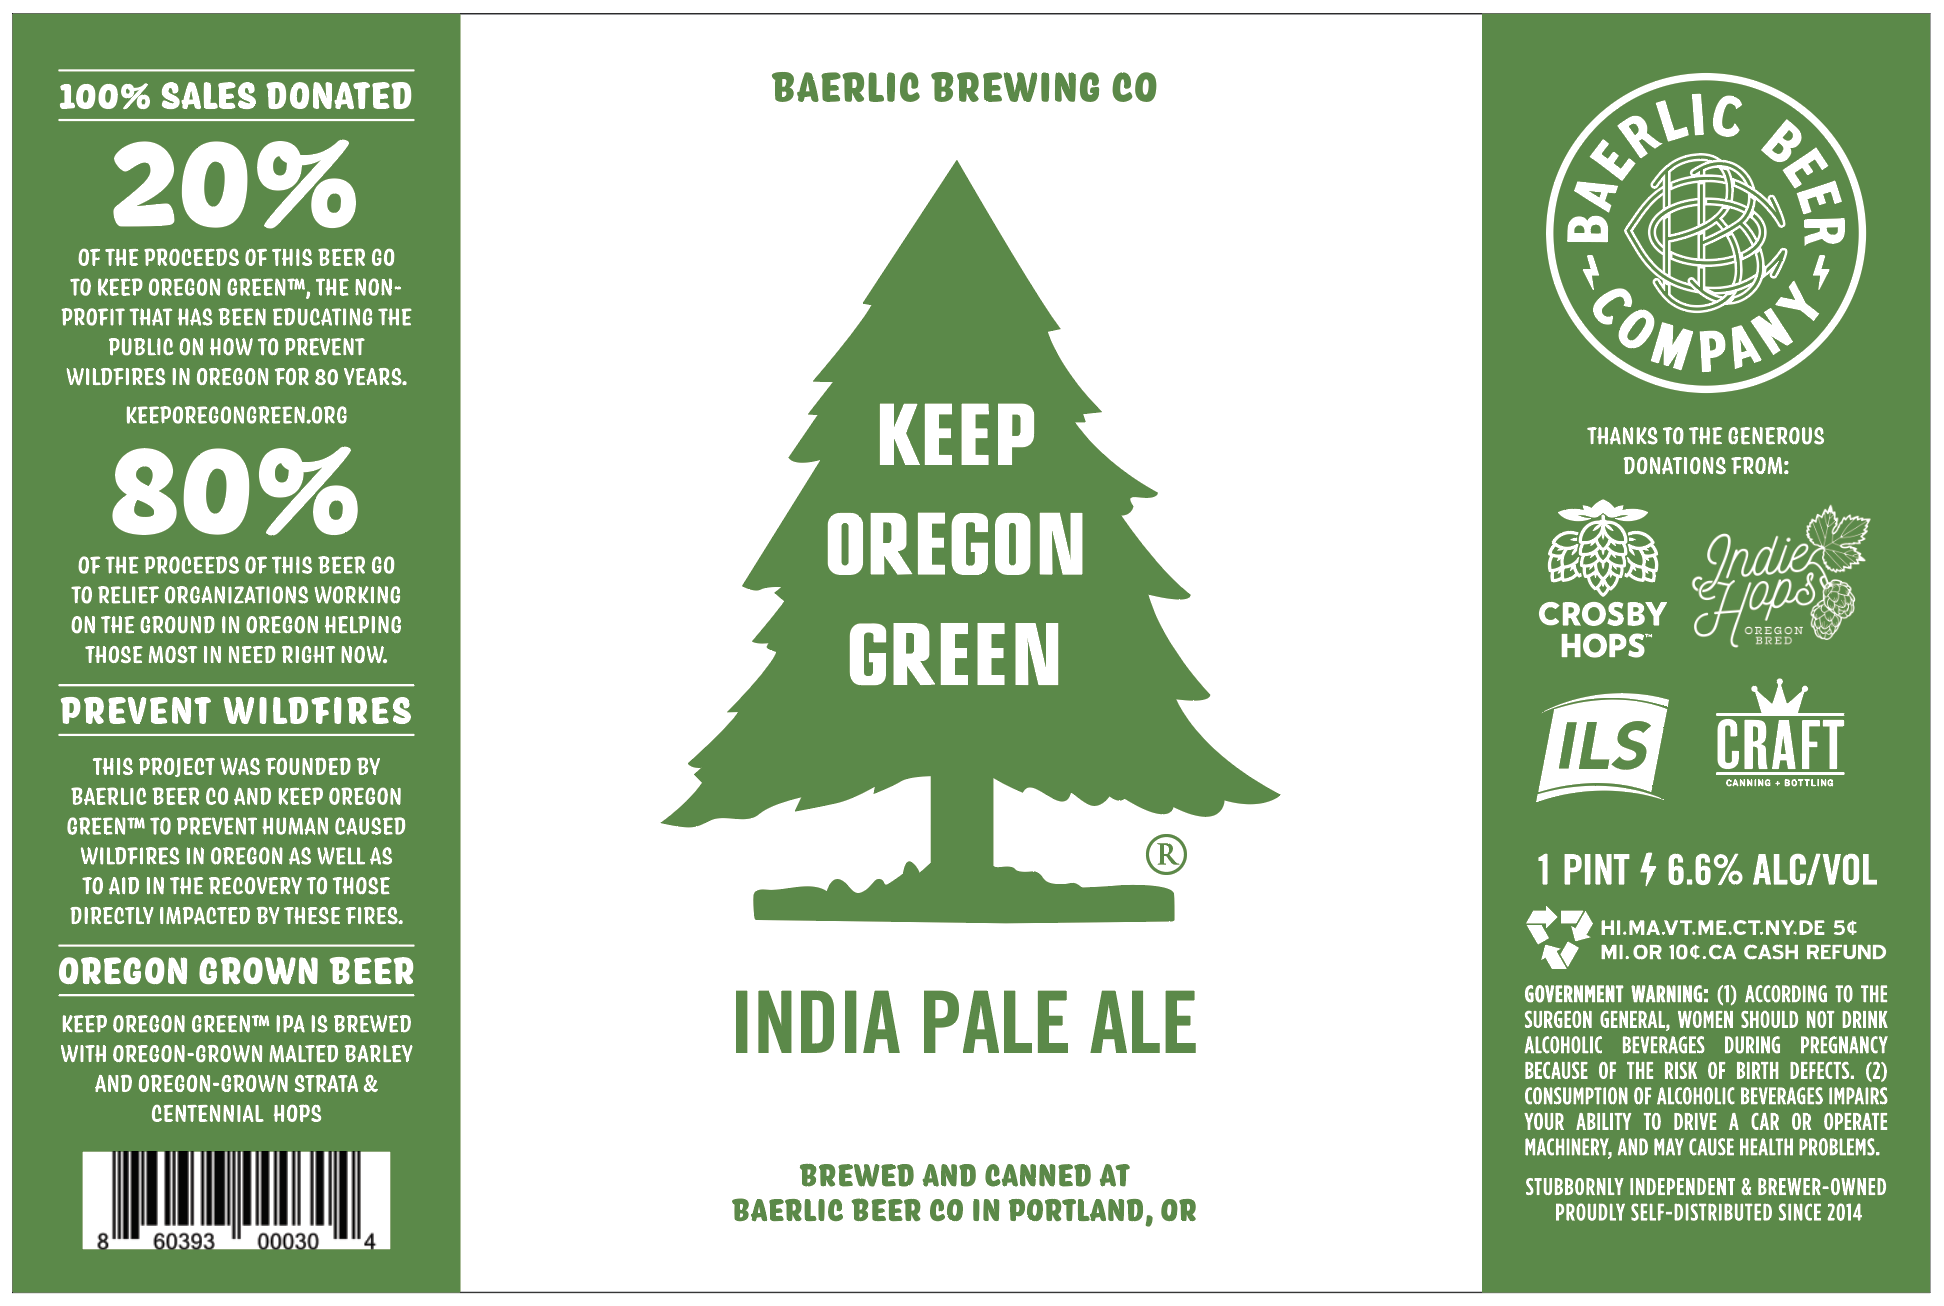 Baerlic Brewing Keep Oregon Green IPA to Fund Wildfire Relief and Prevention